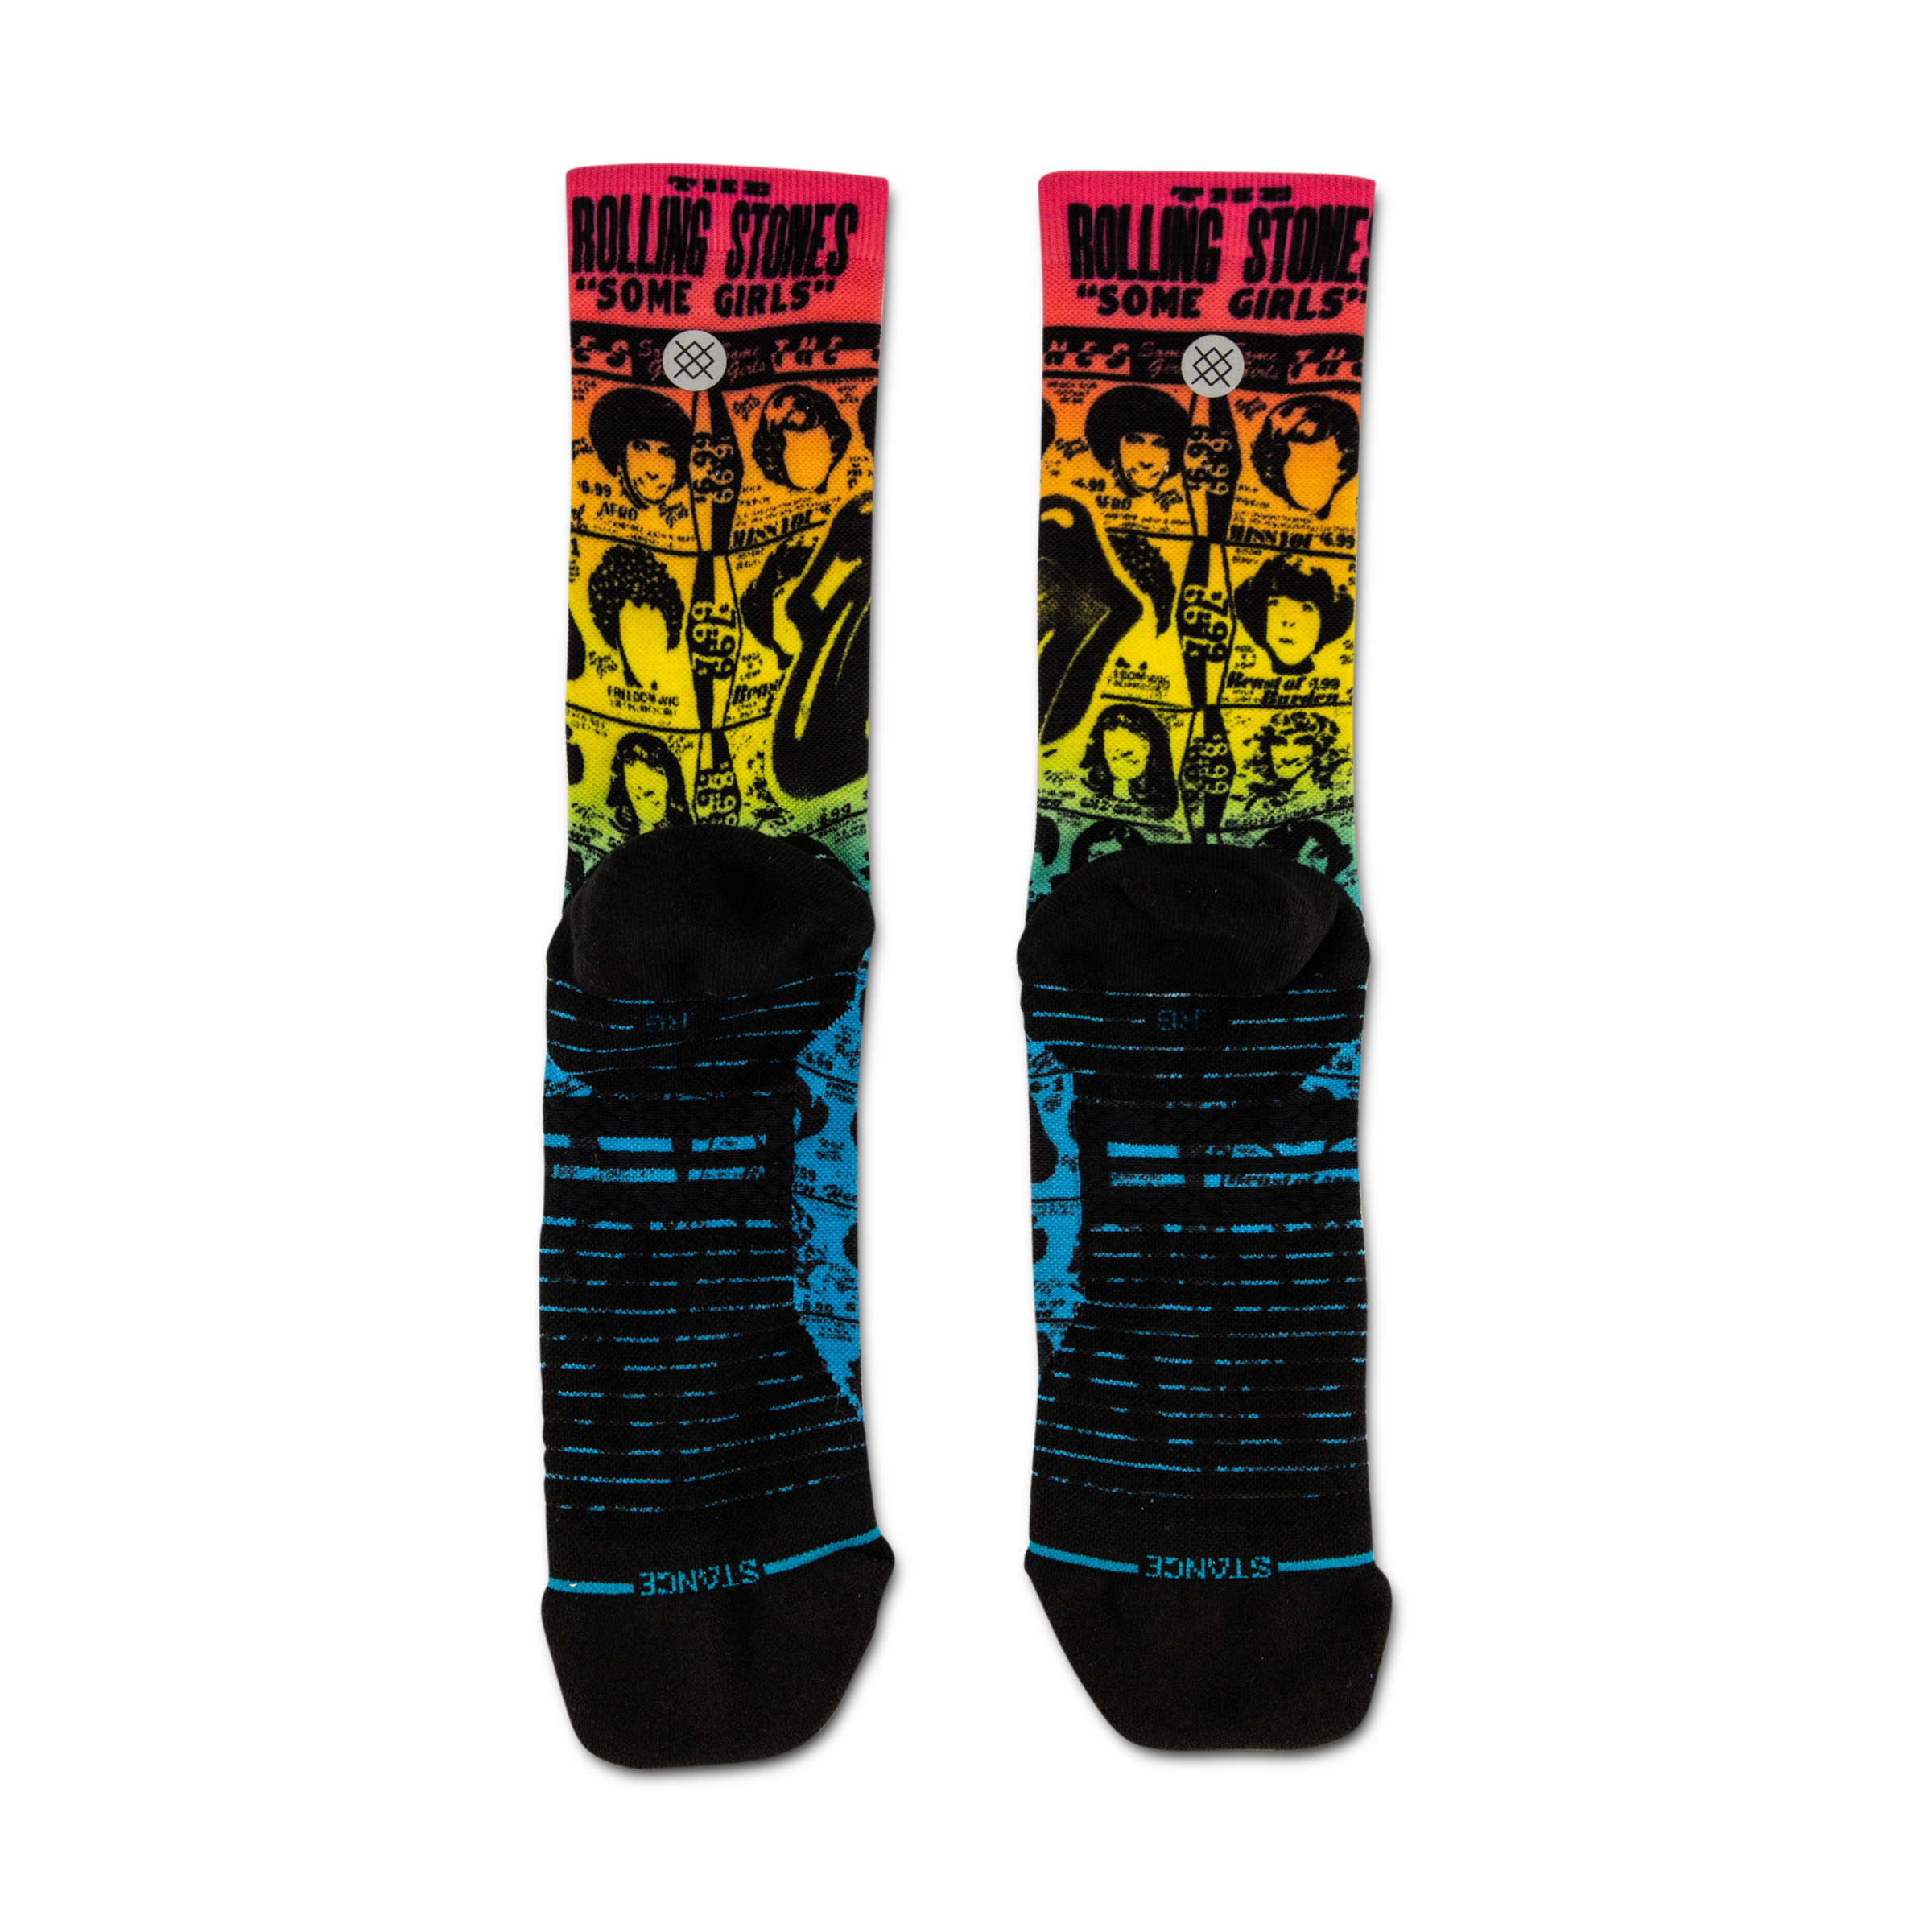 Adult Stance The Notorious B.I.G X The King of NY Crew Socks